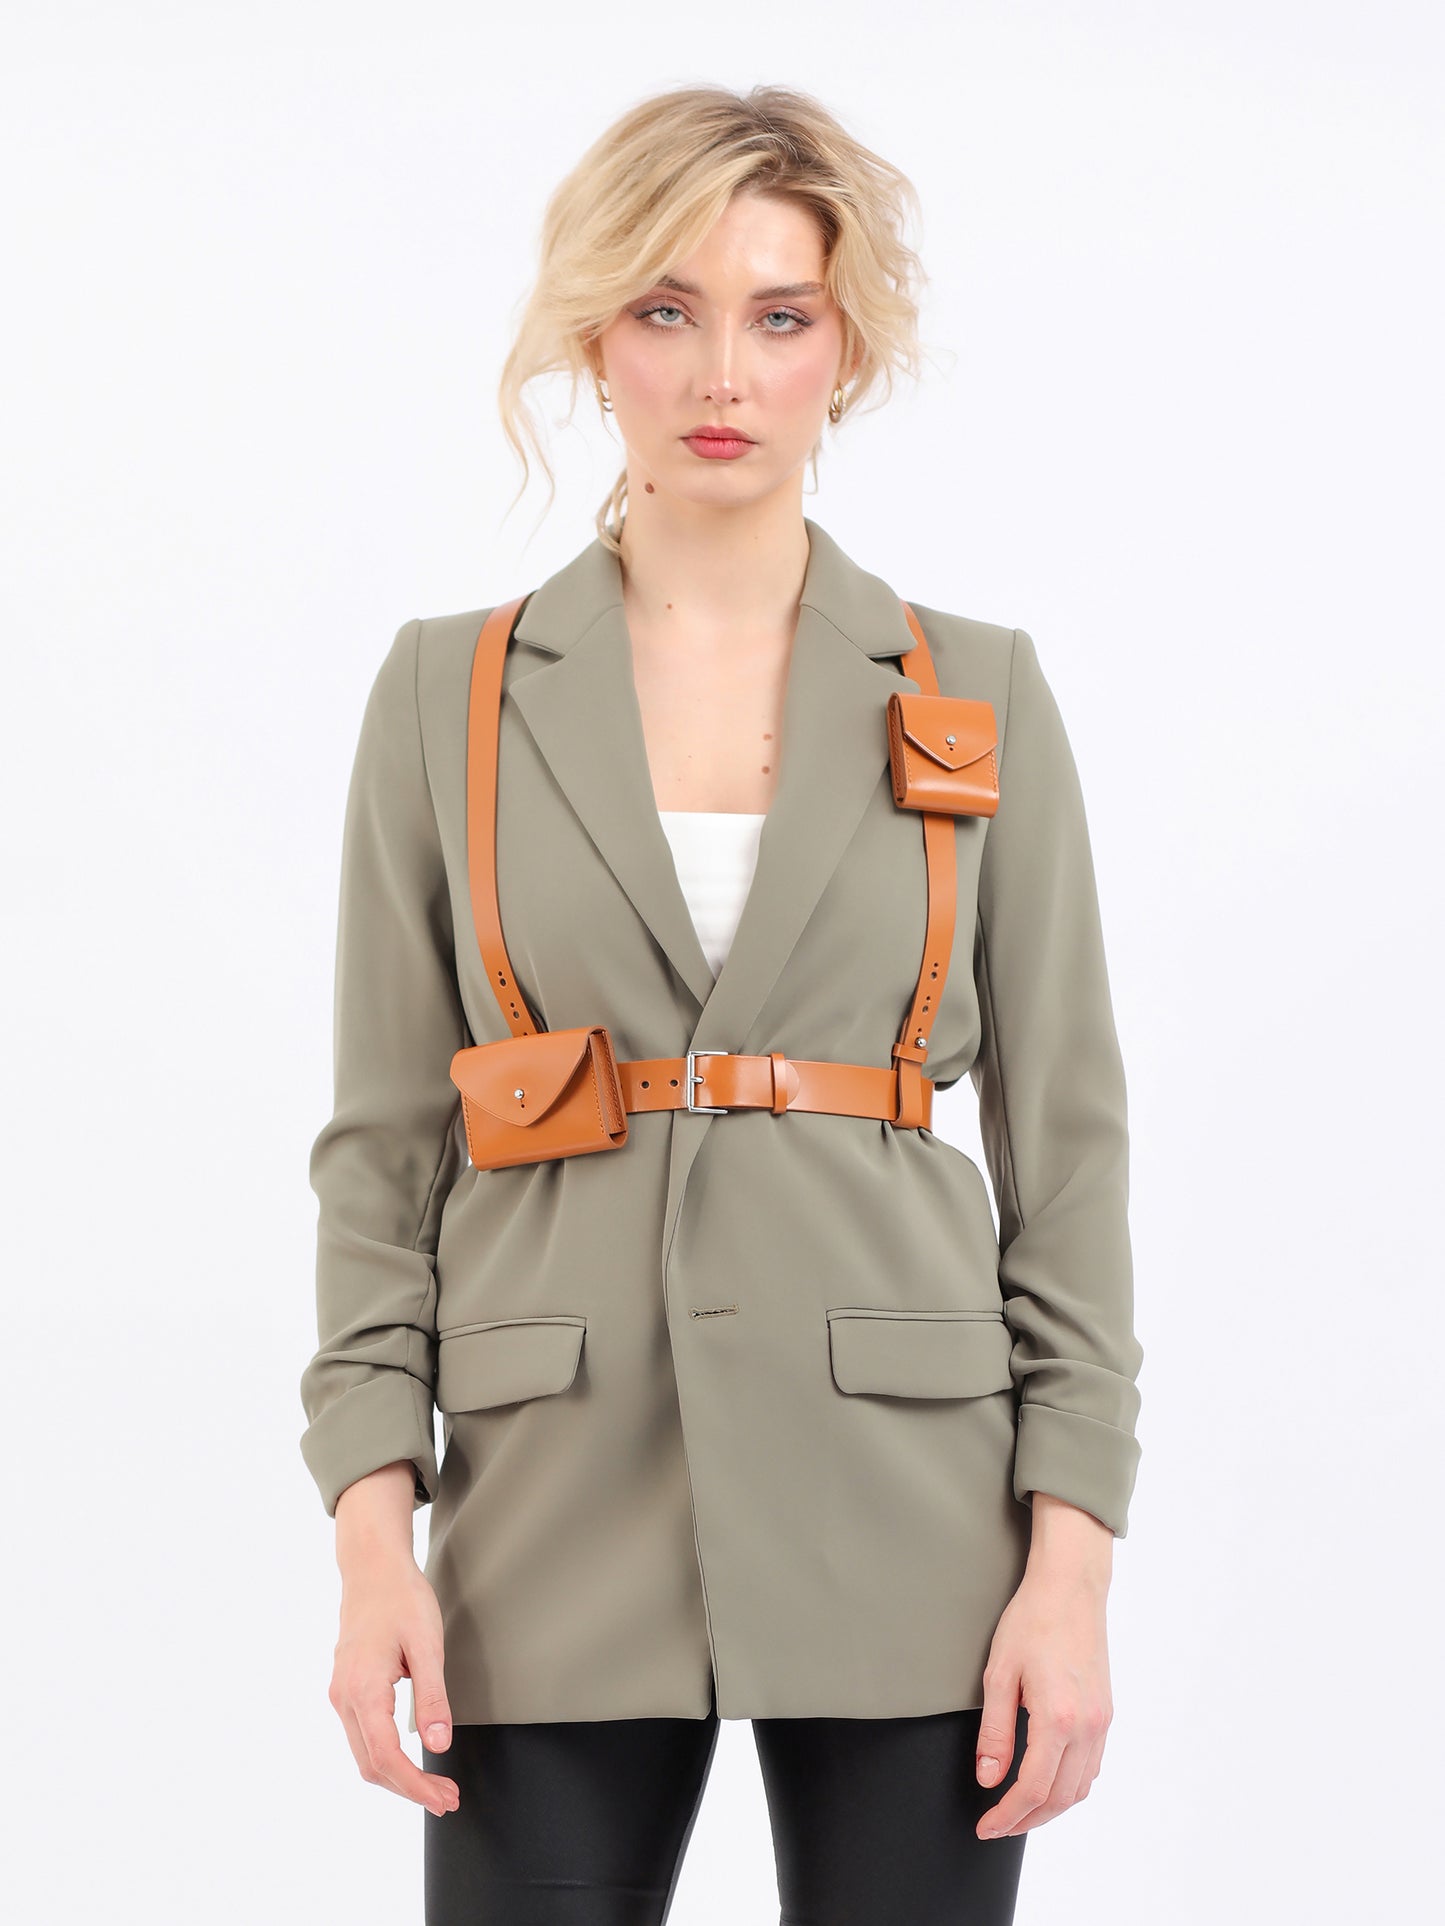 Browun double bag harness fitted on model wearing green blazer.